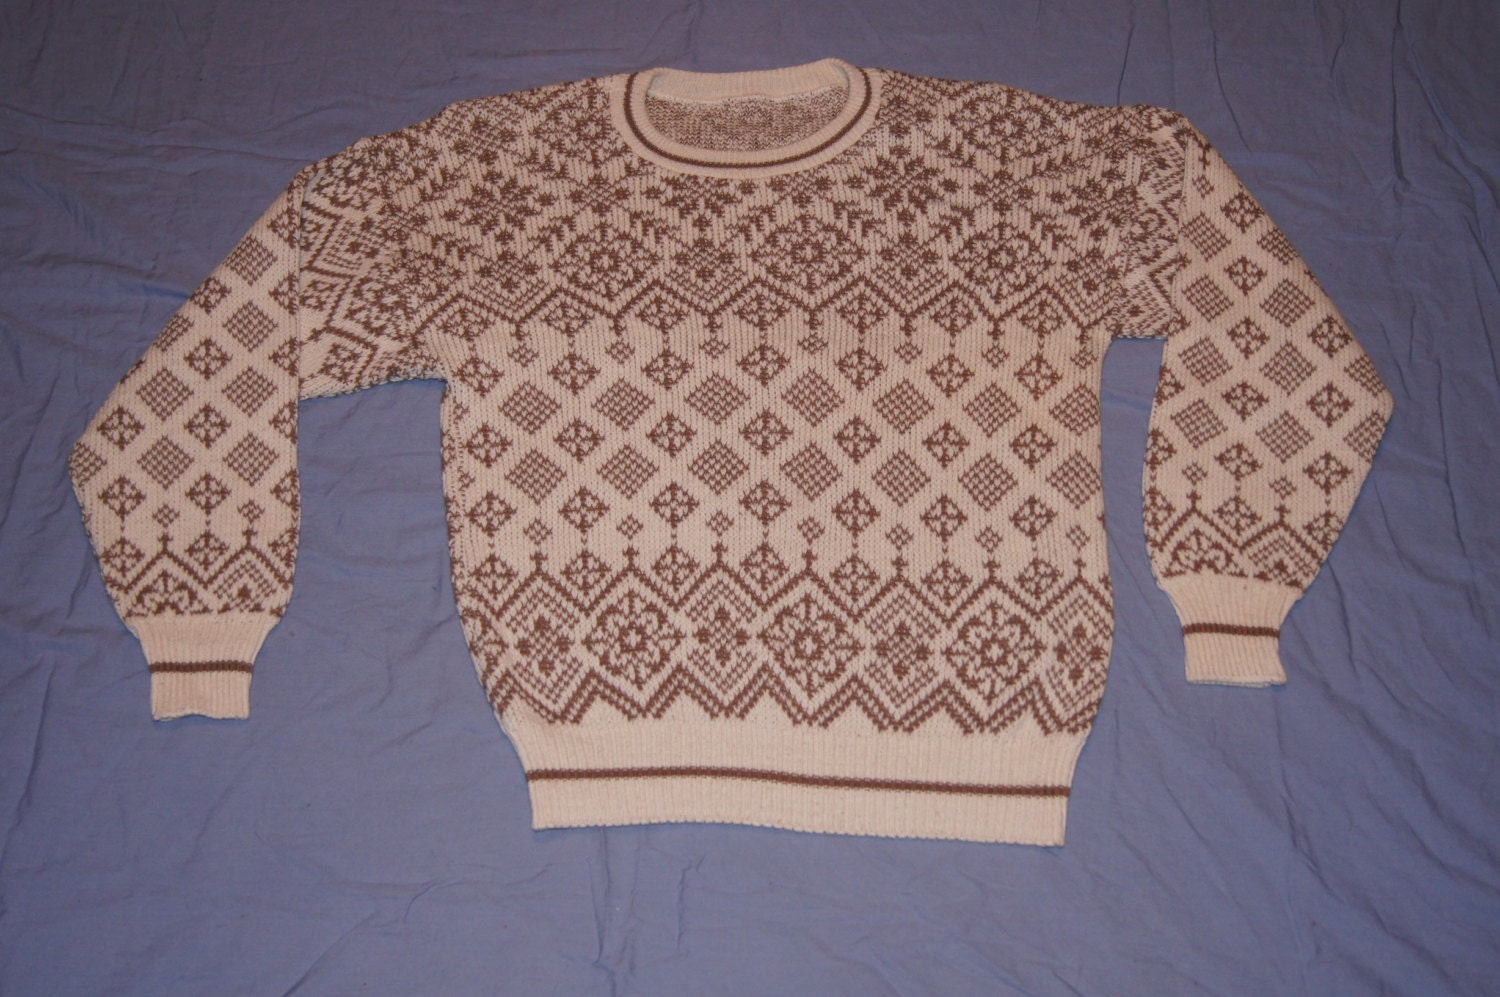 Vintage 1970's Holiday Christmas Sweater